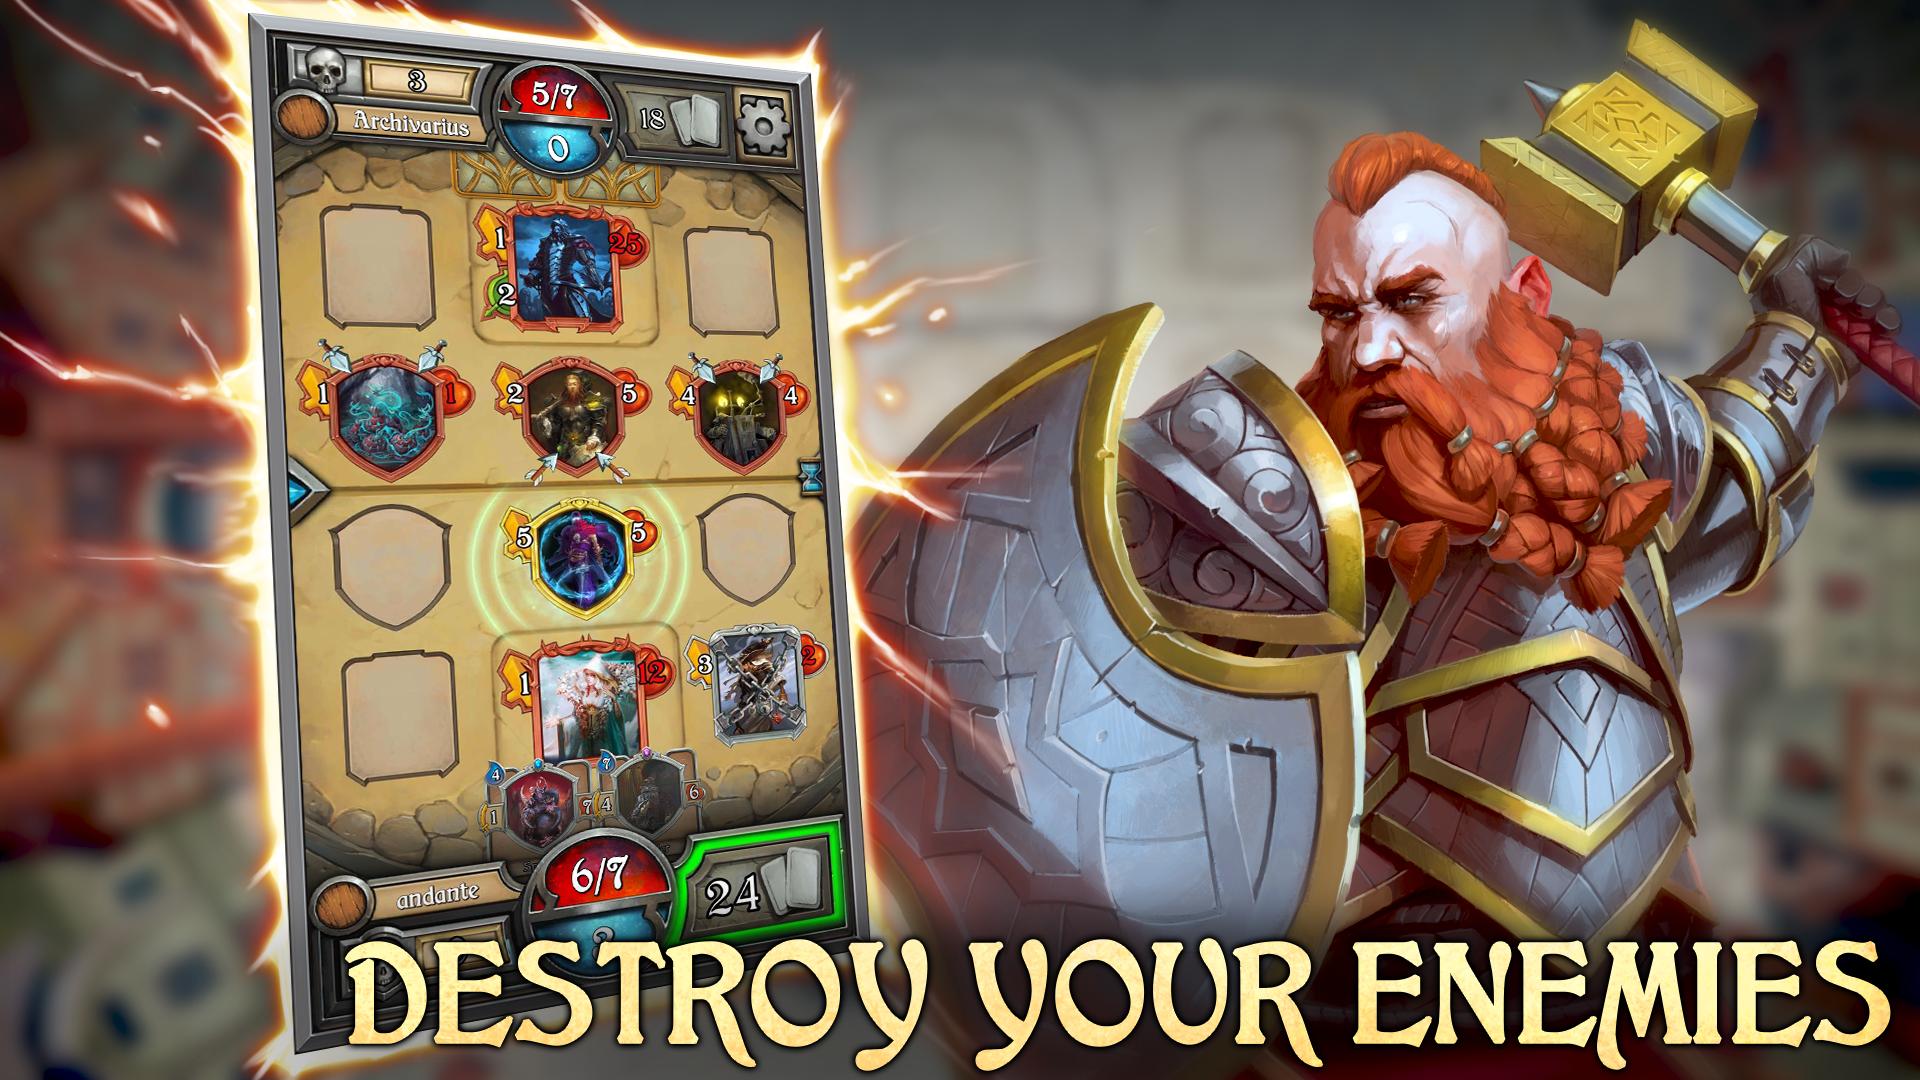 Echo of Combats Collectible card game 0.9.1 Screenshot 2